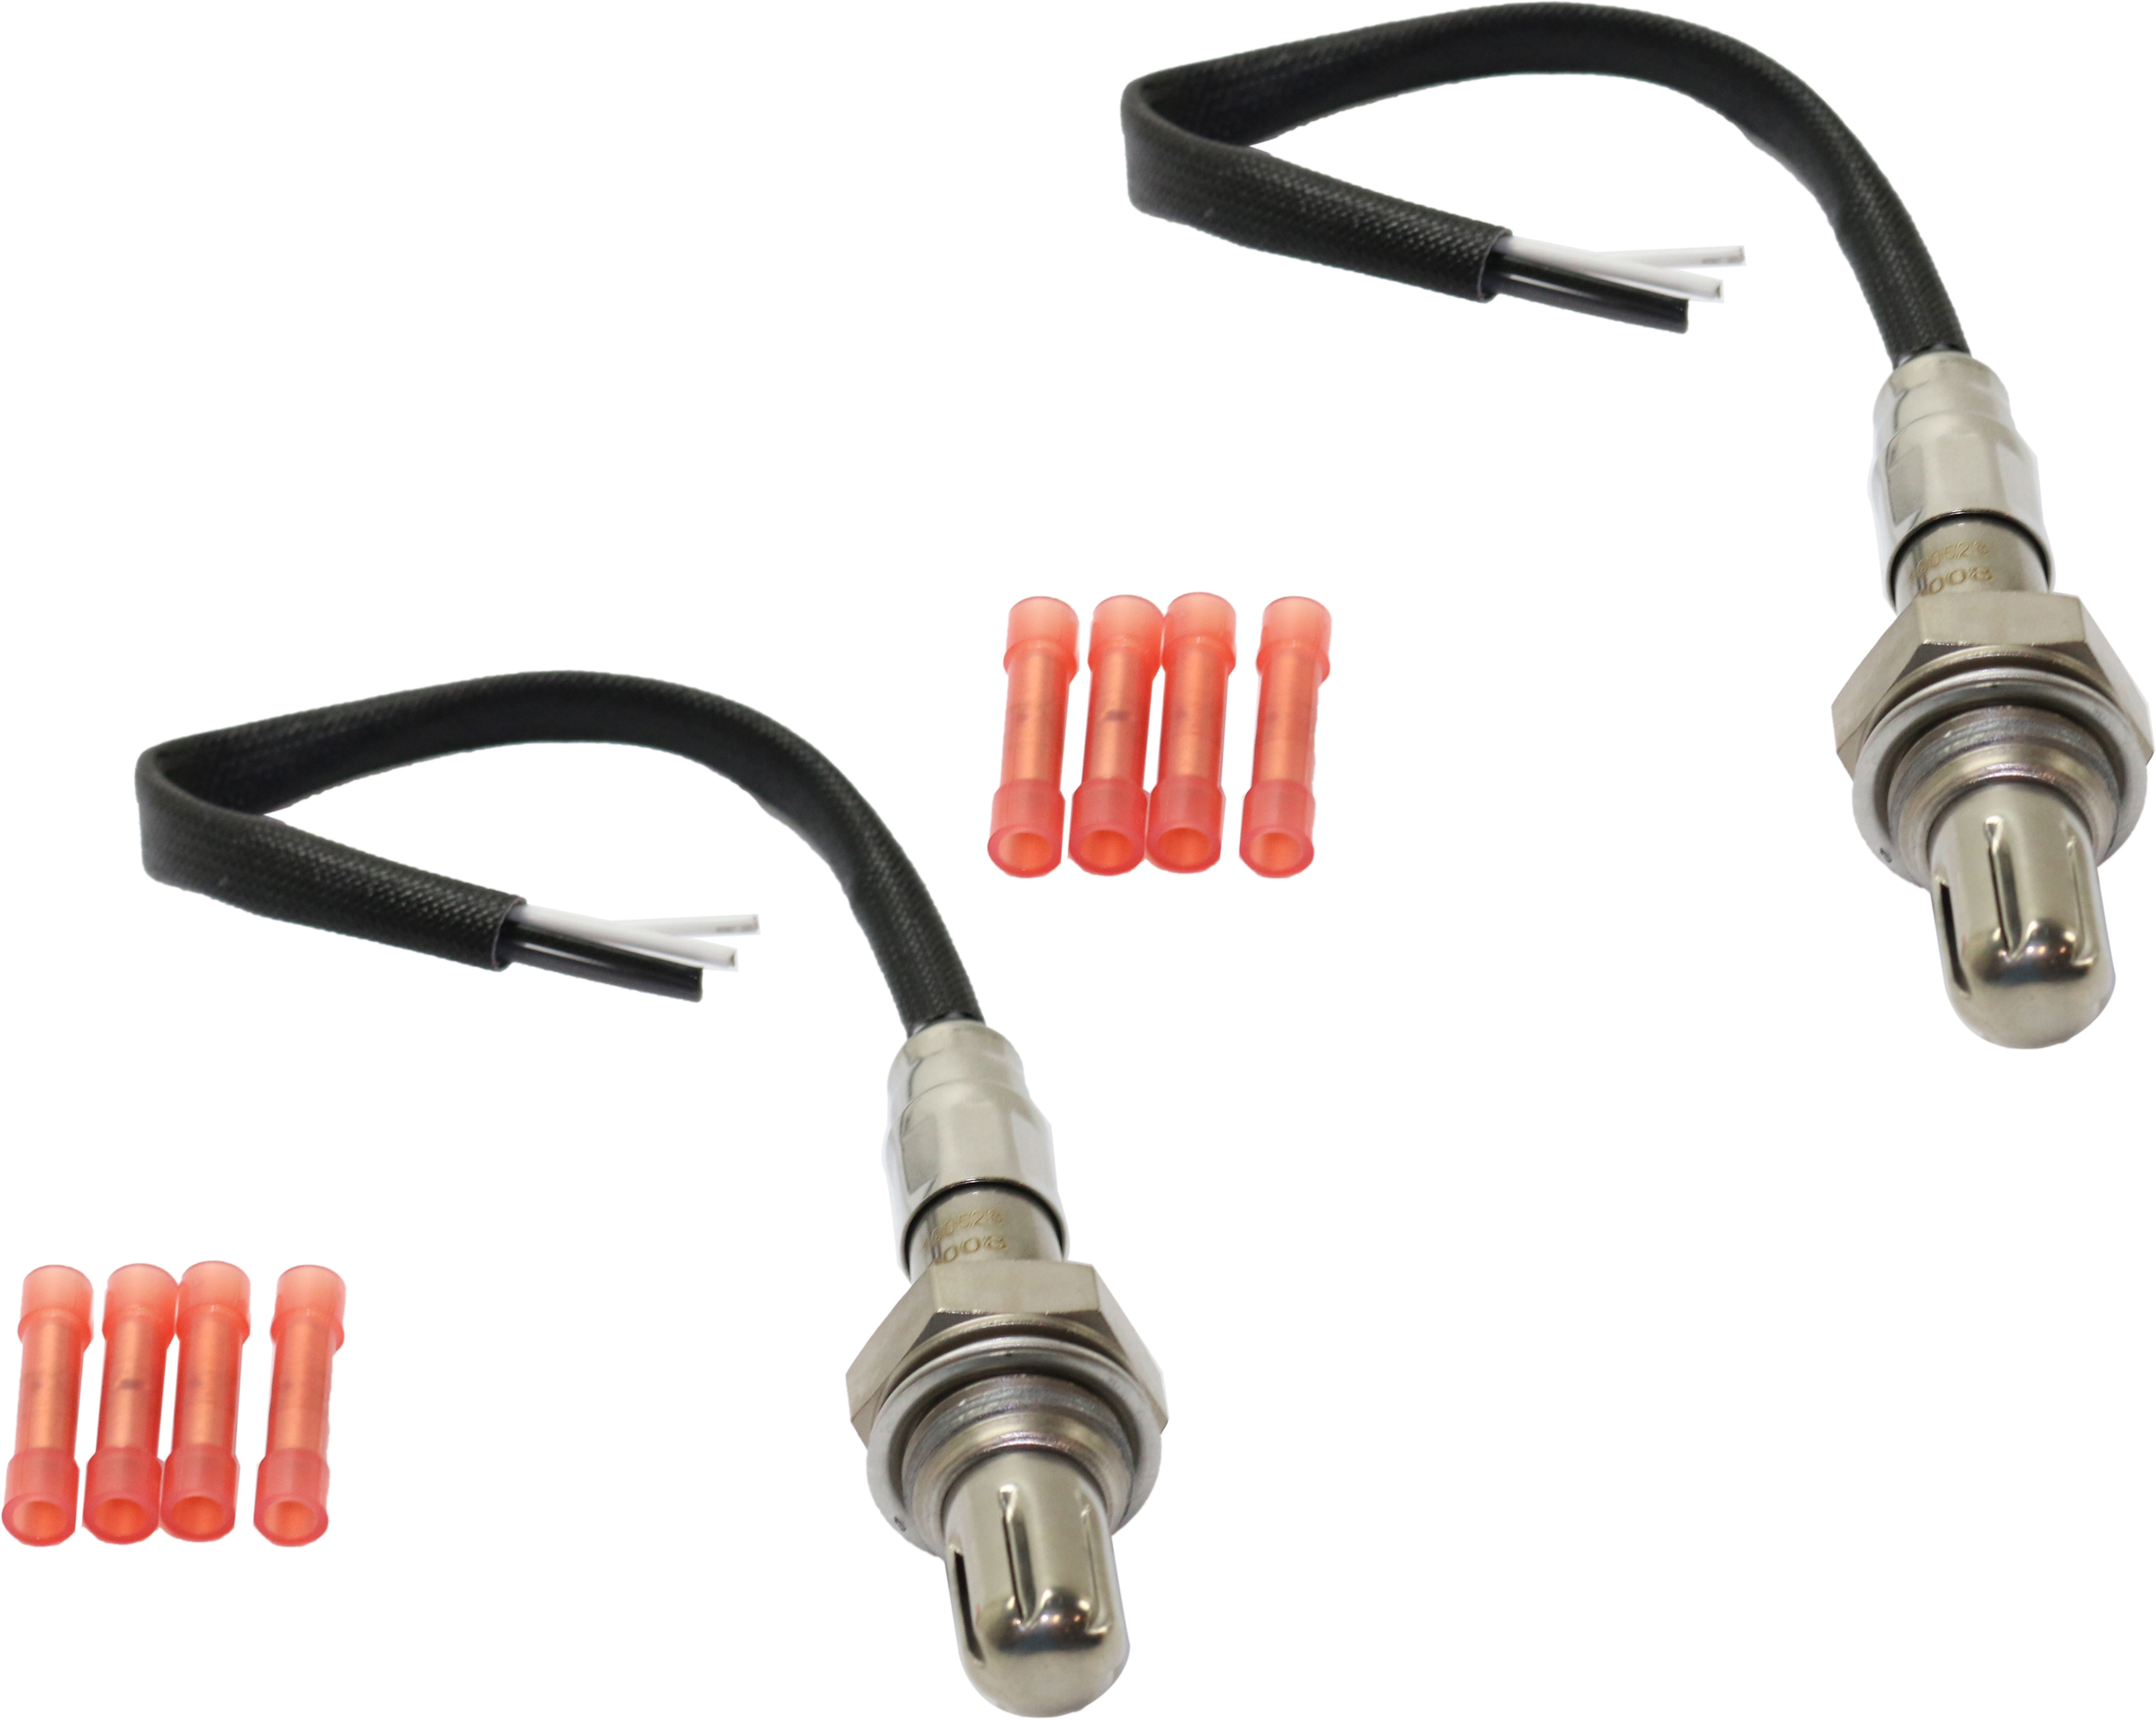 NEW UNIVERSAL LAMBDA OXYGEN SENSOR O2 EASY FIT FOR 3 WIRE